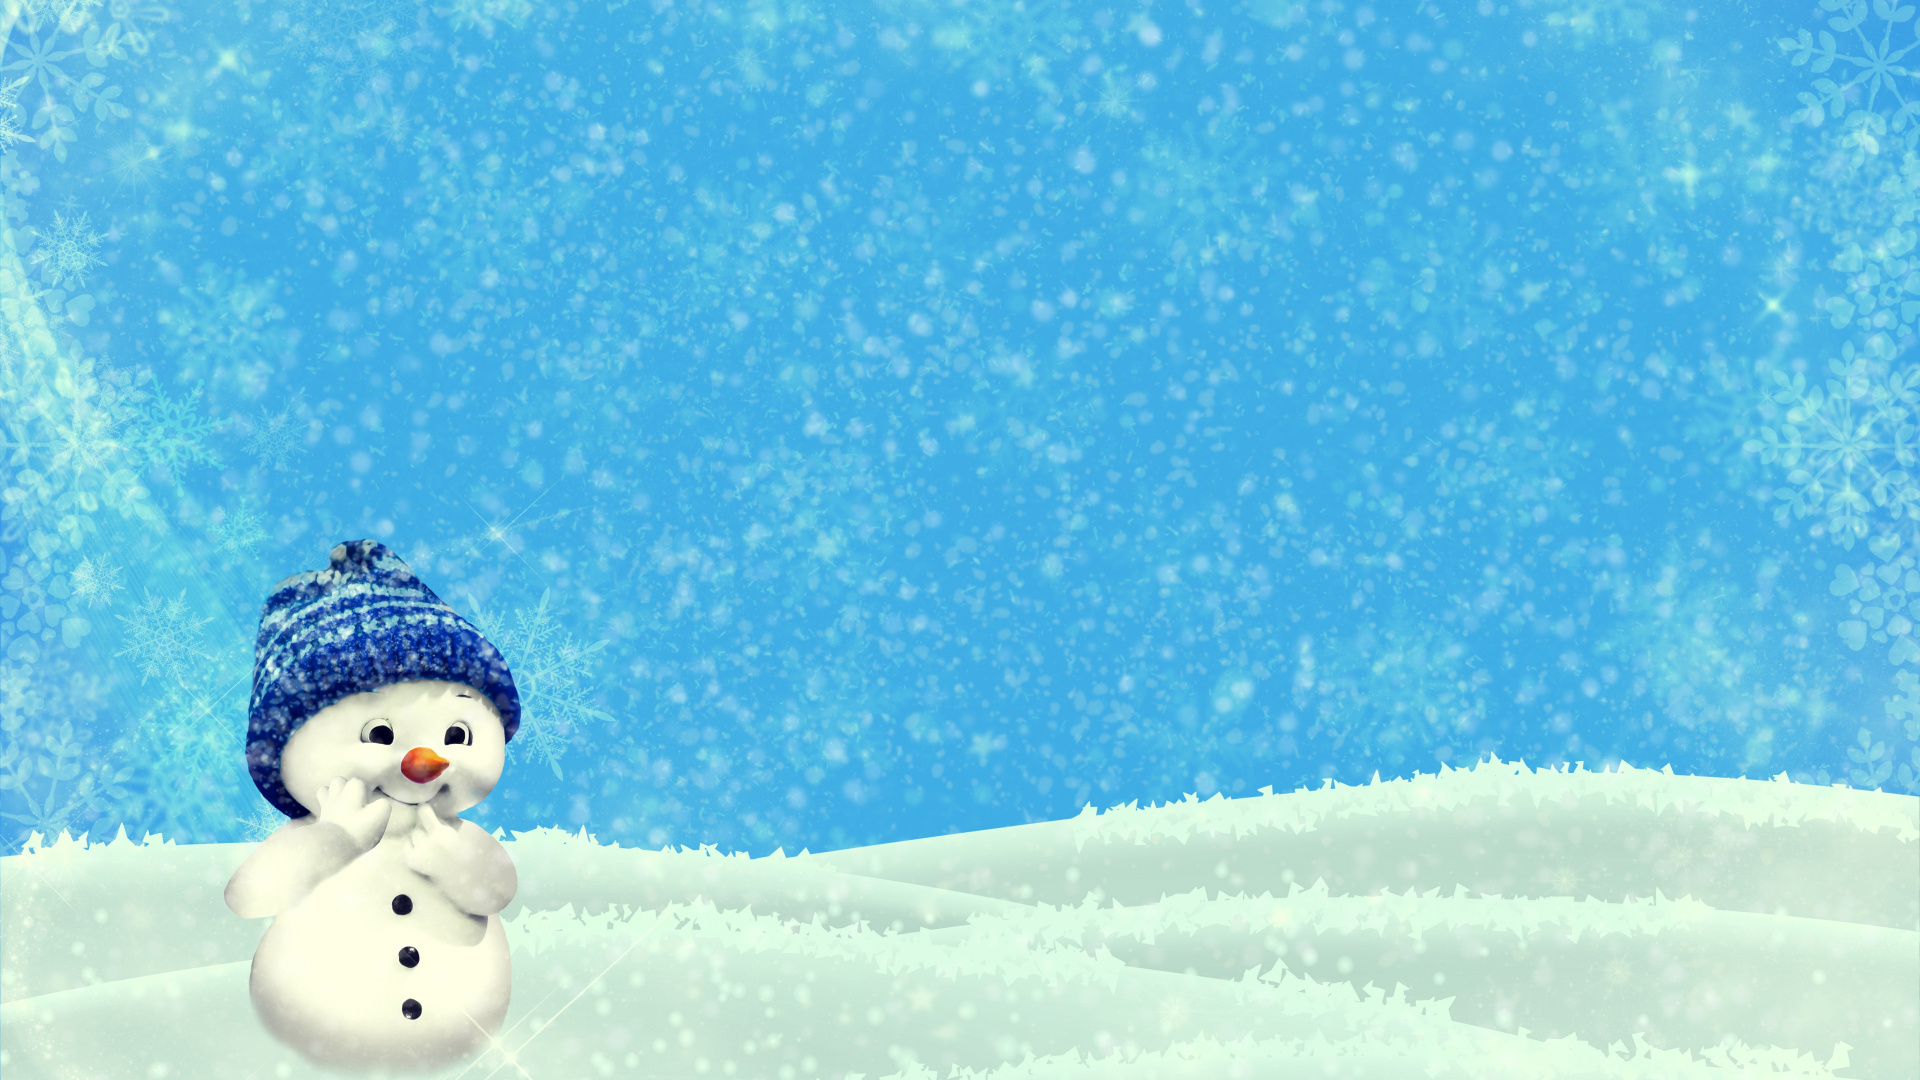 Snowman, Christmas Day, Snow, Winter, Freezing. Wallpaper in 1920x1080 Resolution